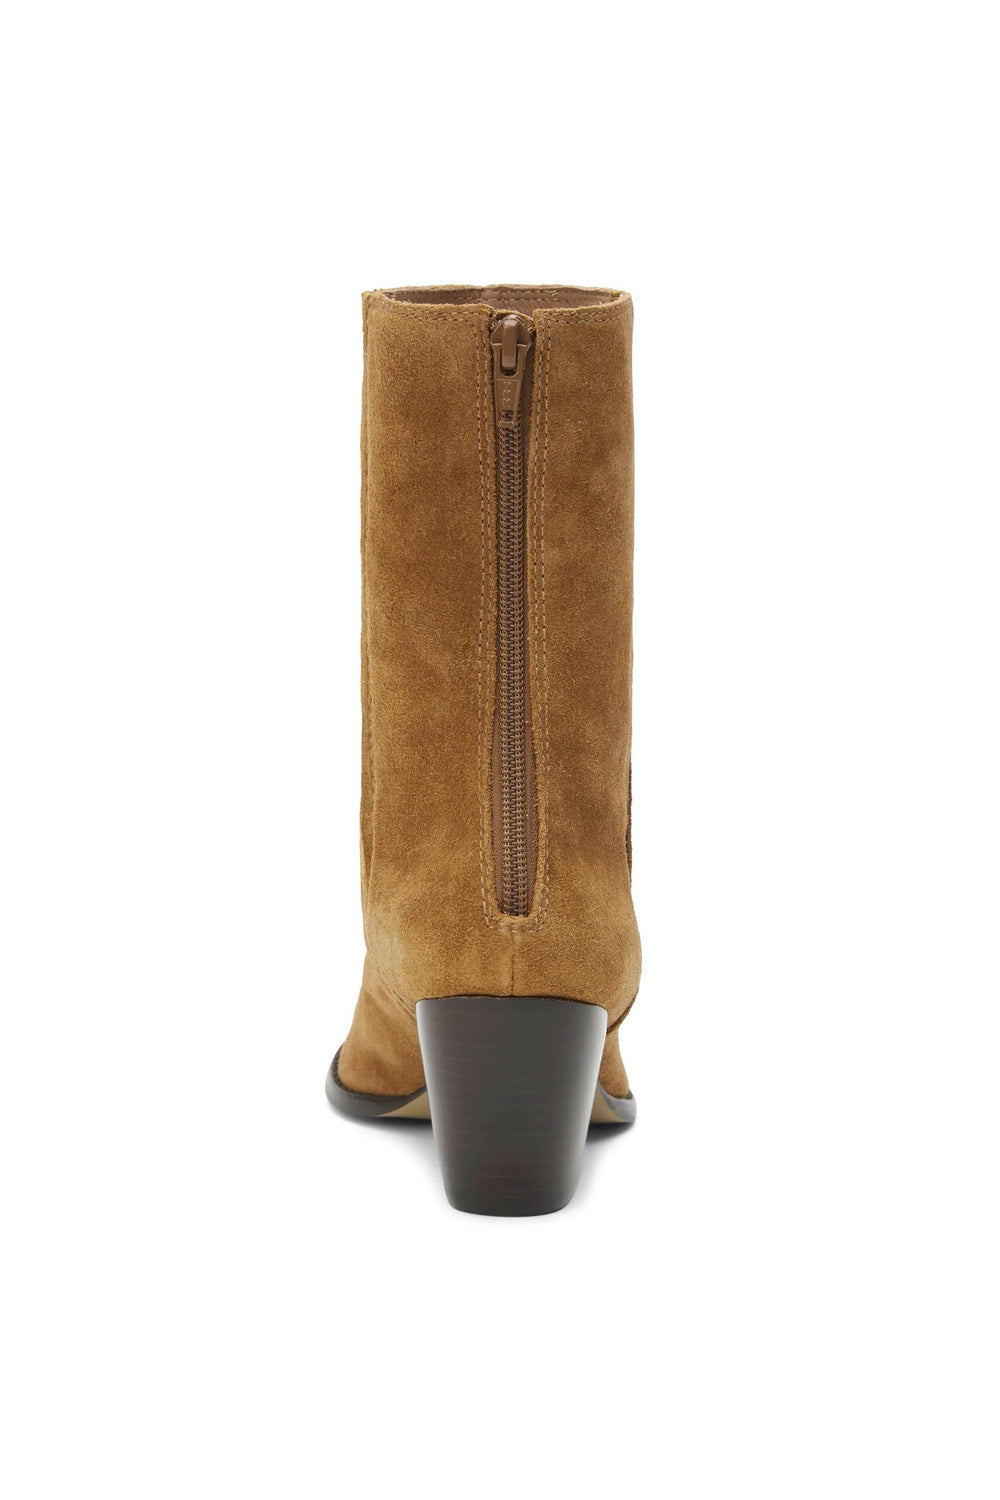 Tobacco Annabelle Boot